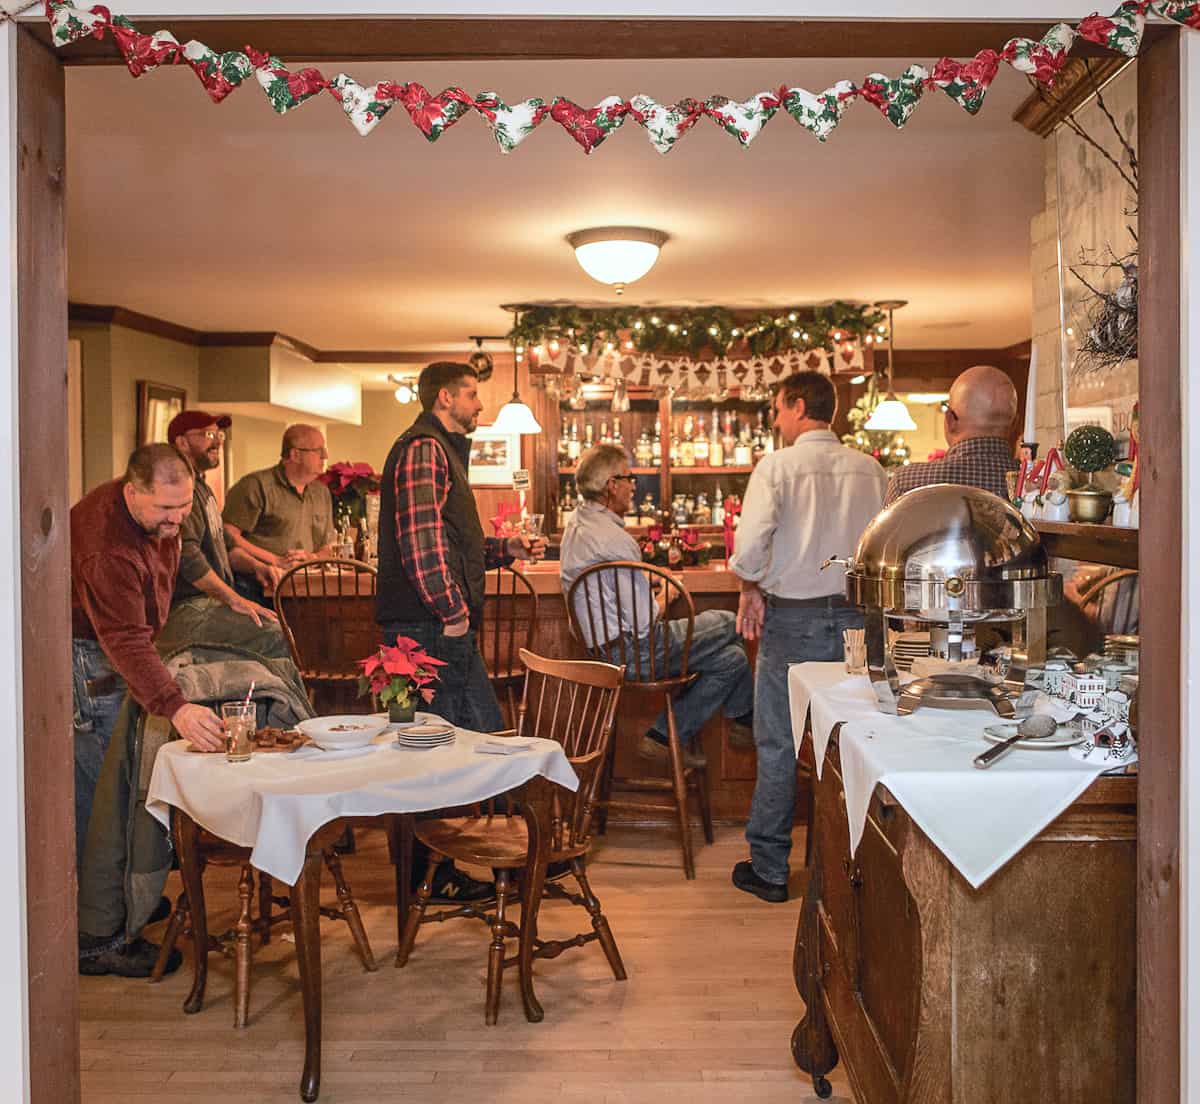 West Mountain Inn - Tavern with Holiday Decor and Guests